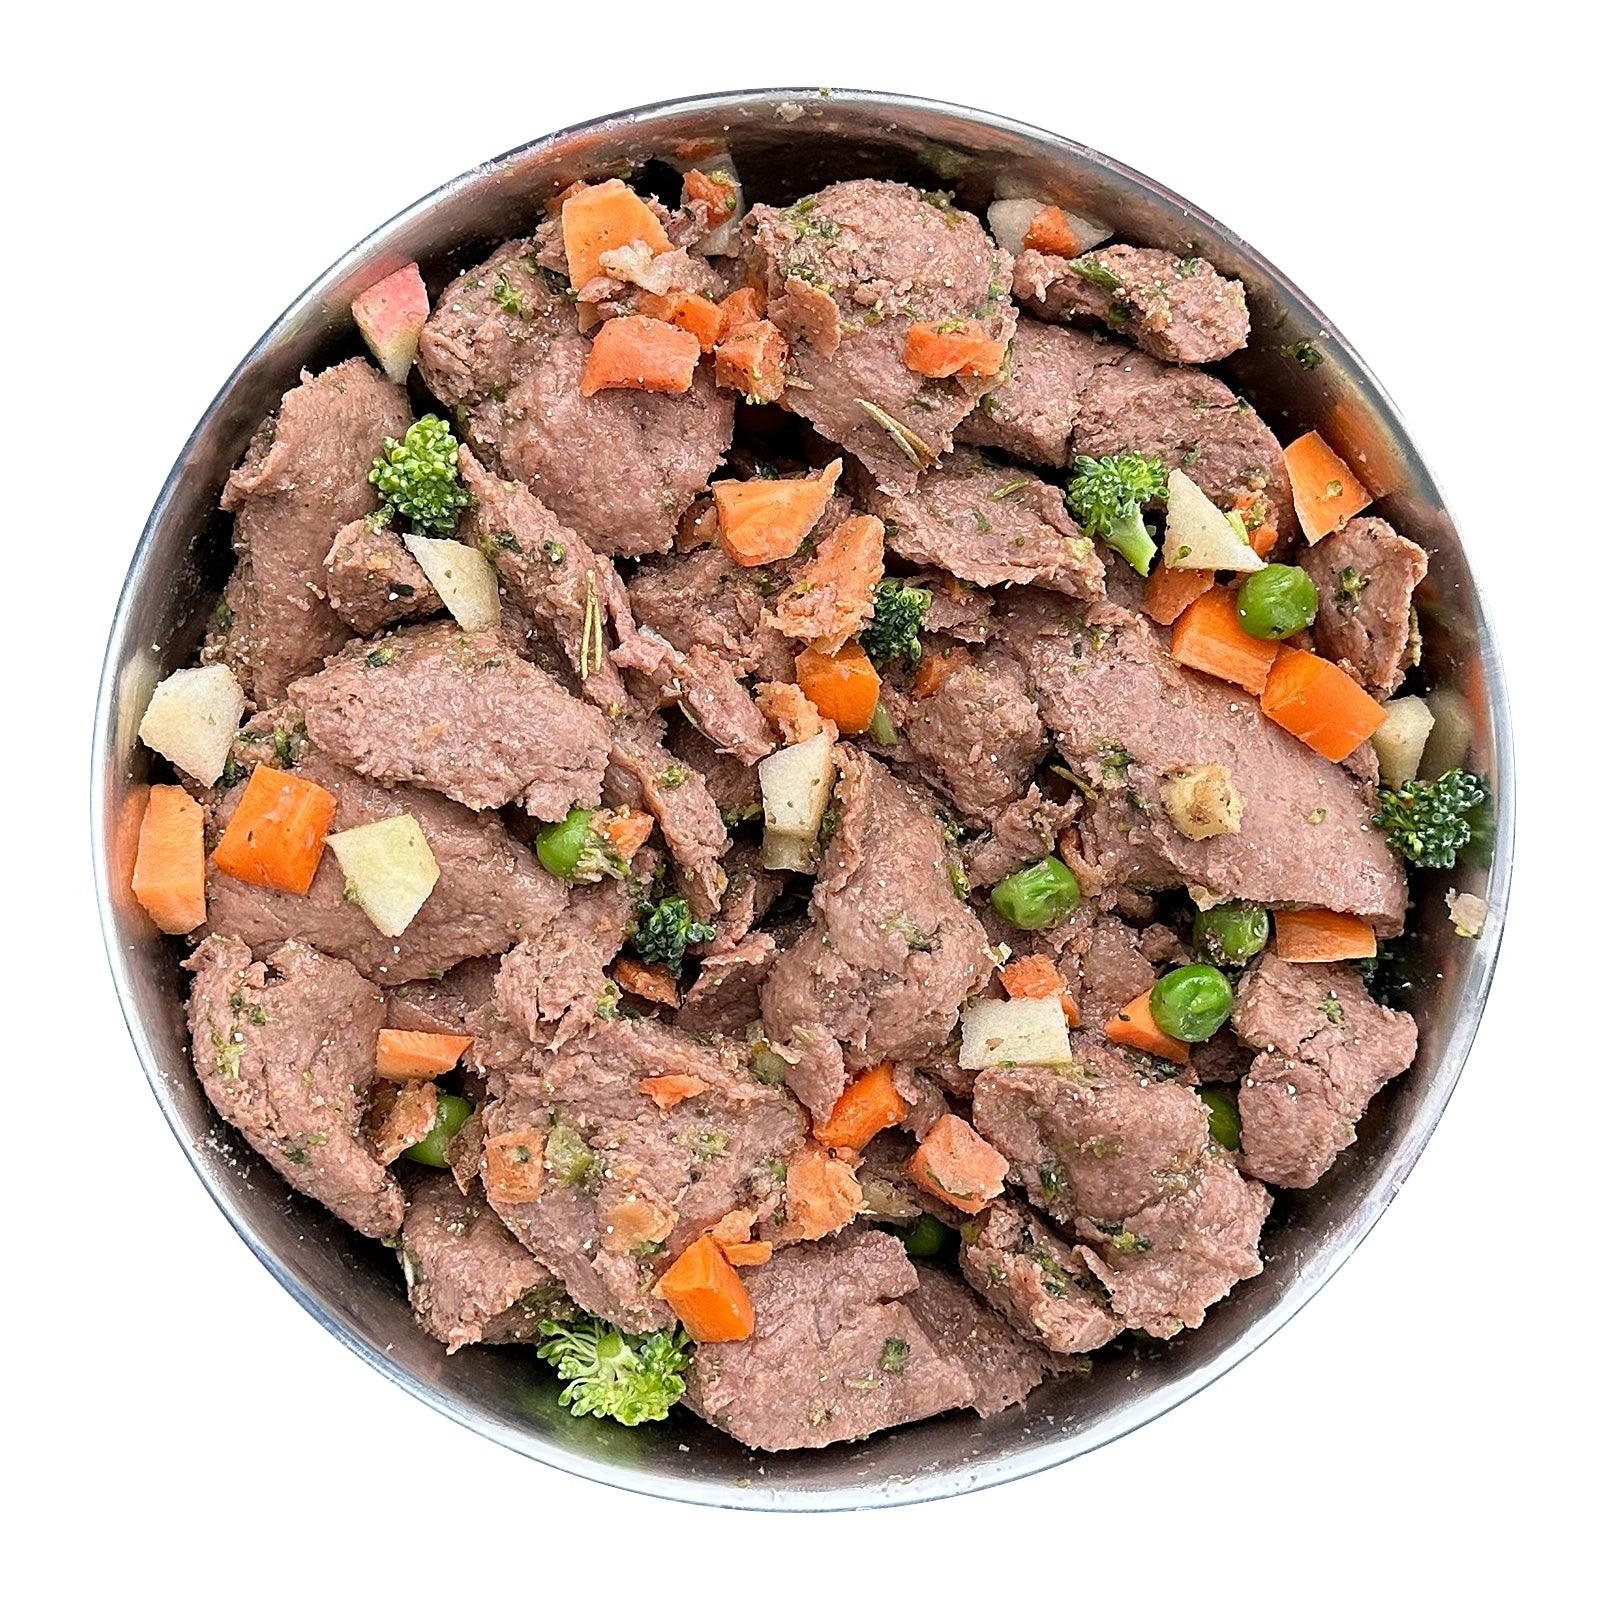 Cooked Fresh Beef Menu with Sweet potato, Apple and Broccoli (glass)